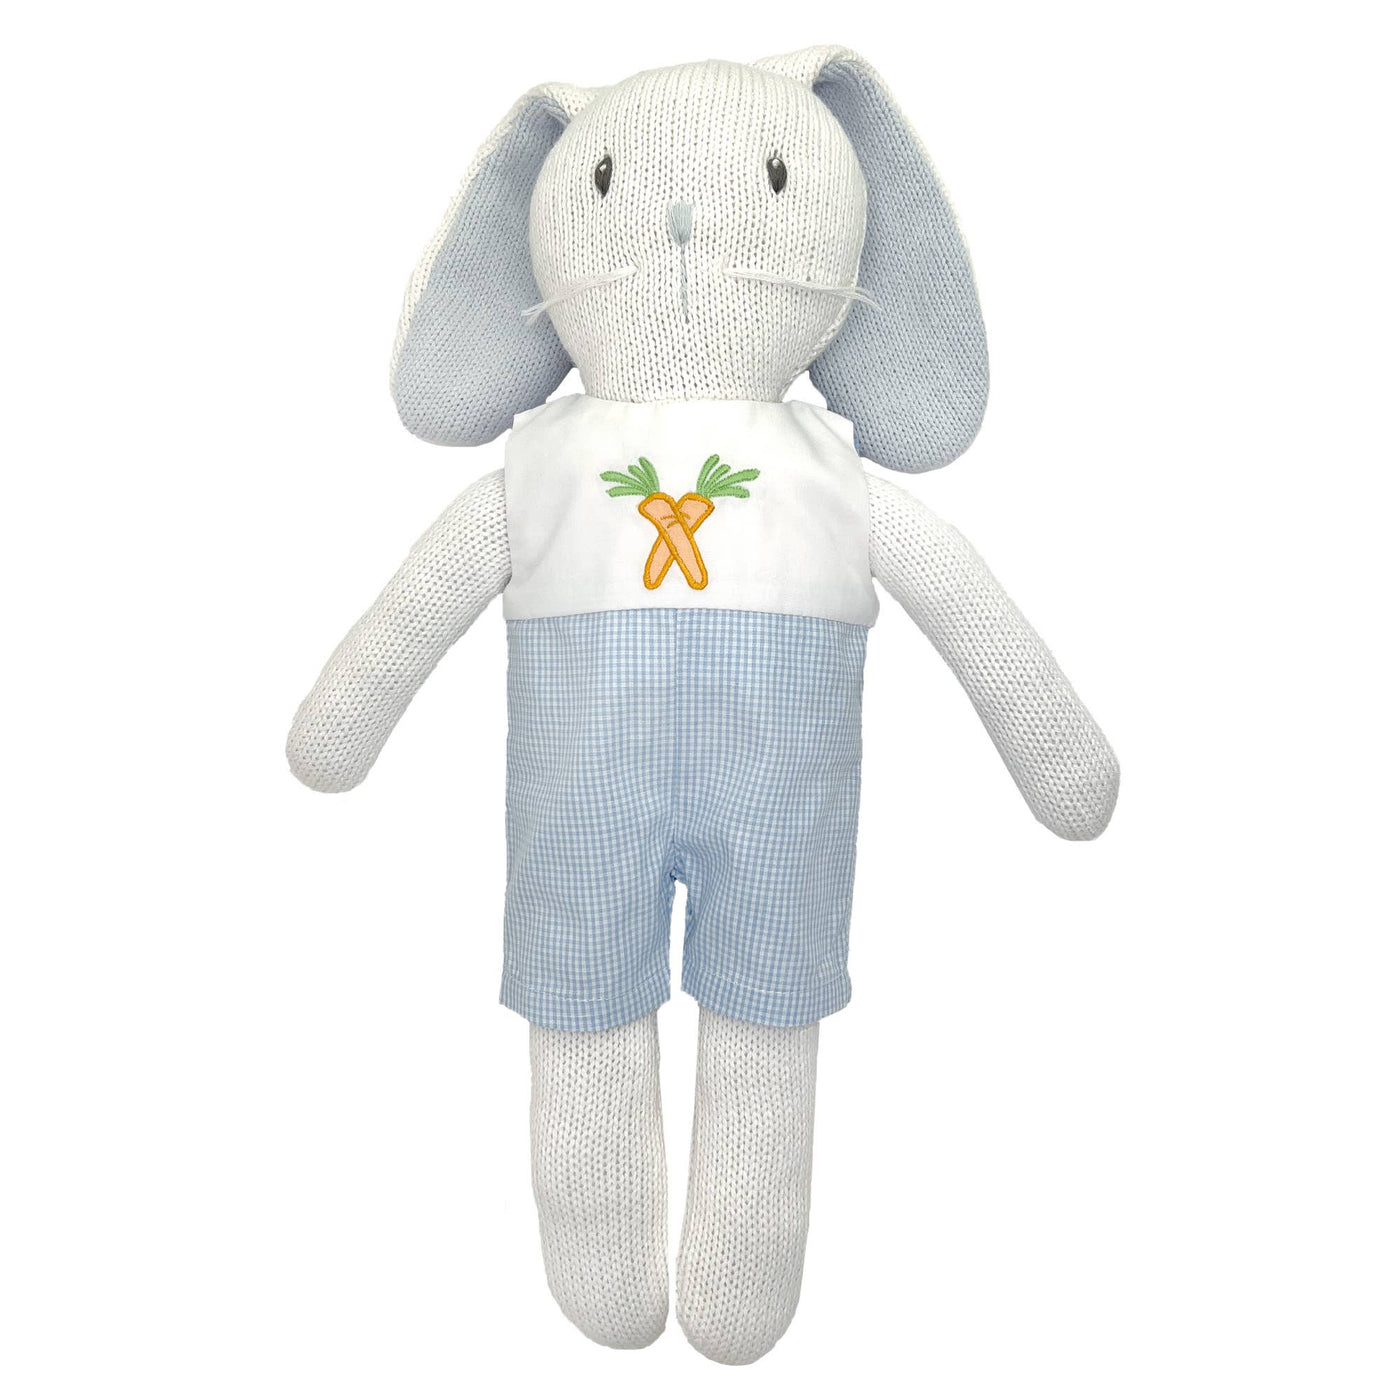 Knit Bunny Doll with Embroidered Romper: 14"